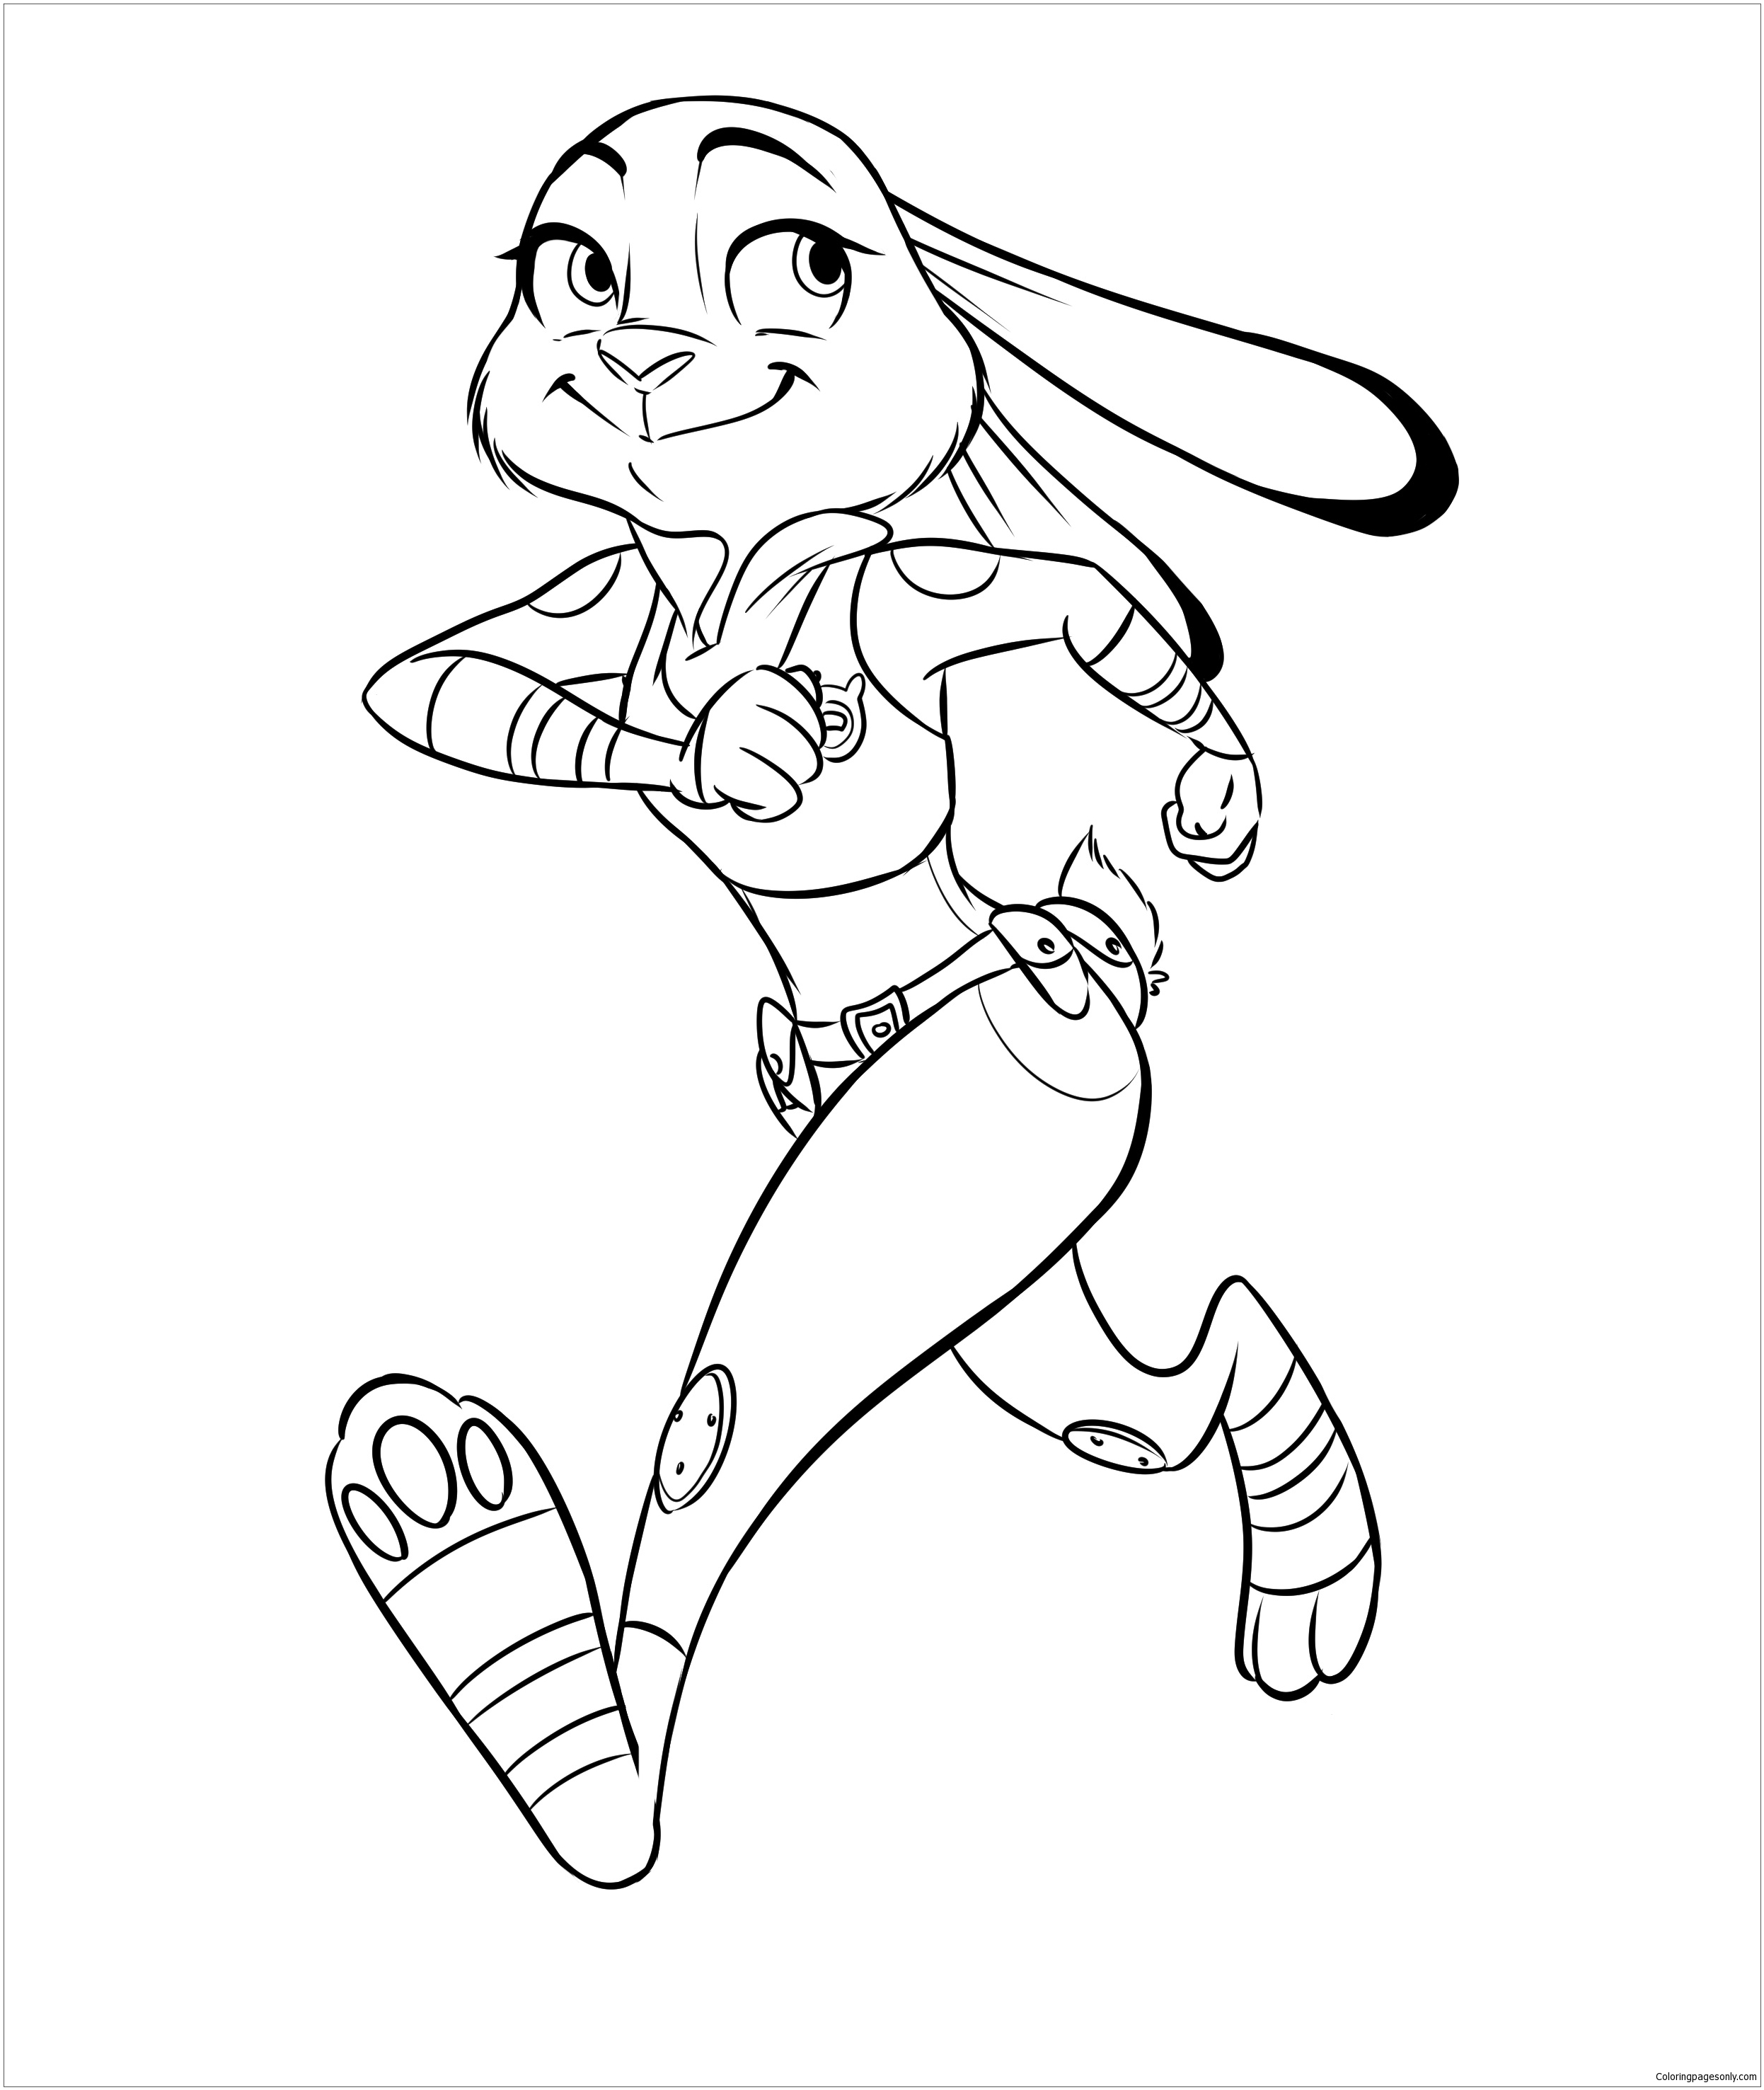 Judy Hopps from Zootopia 1 Coloring Pages - Cartoons Coloring Pages